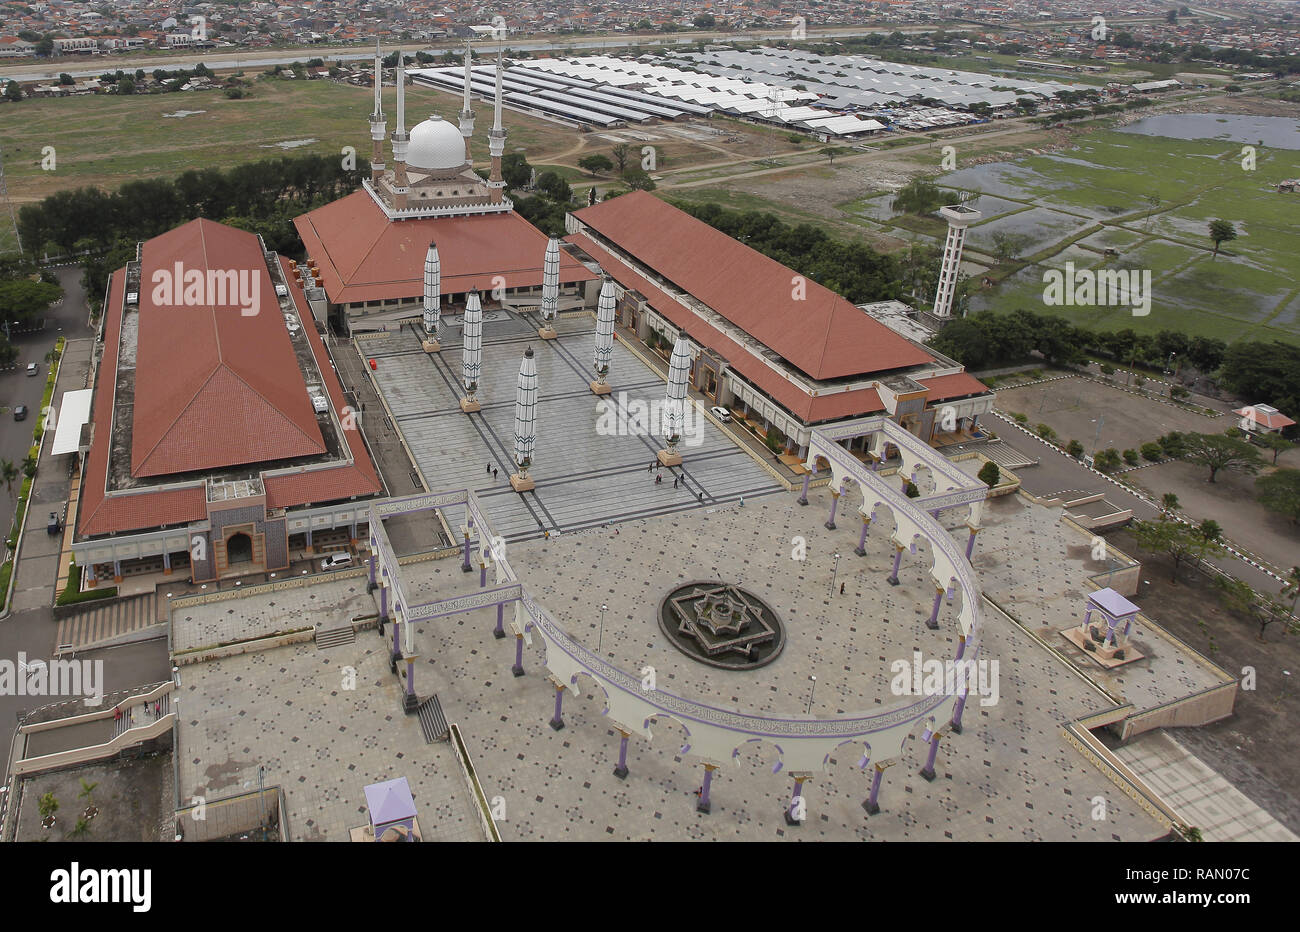 Semarang, Central Java, Indonesia. 2nd Jan, 2019. A View of the Central Java Grand Mosque complex (MAJT) in Semarang, Central Java from aerial.The mosque with a capacity of 15,000 worshipers is not only a center of worship and Islamic da'wah, it is also a favourite tourist destination in Semarang because it has a unique architecture with a blend of Javanese, Arabic and Roman styles. Credit: Adriana Adinandra/SOPA Images/ZUMA Wire/Alamy Live News Stock Photo